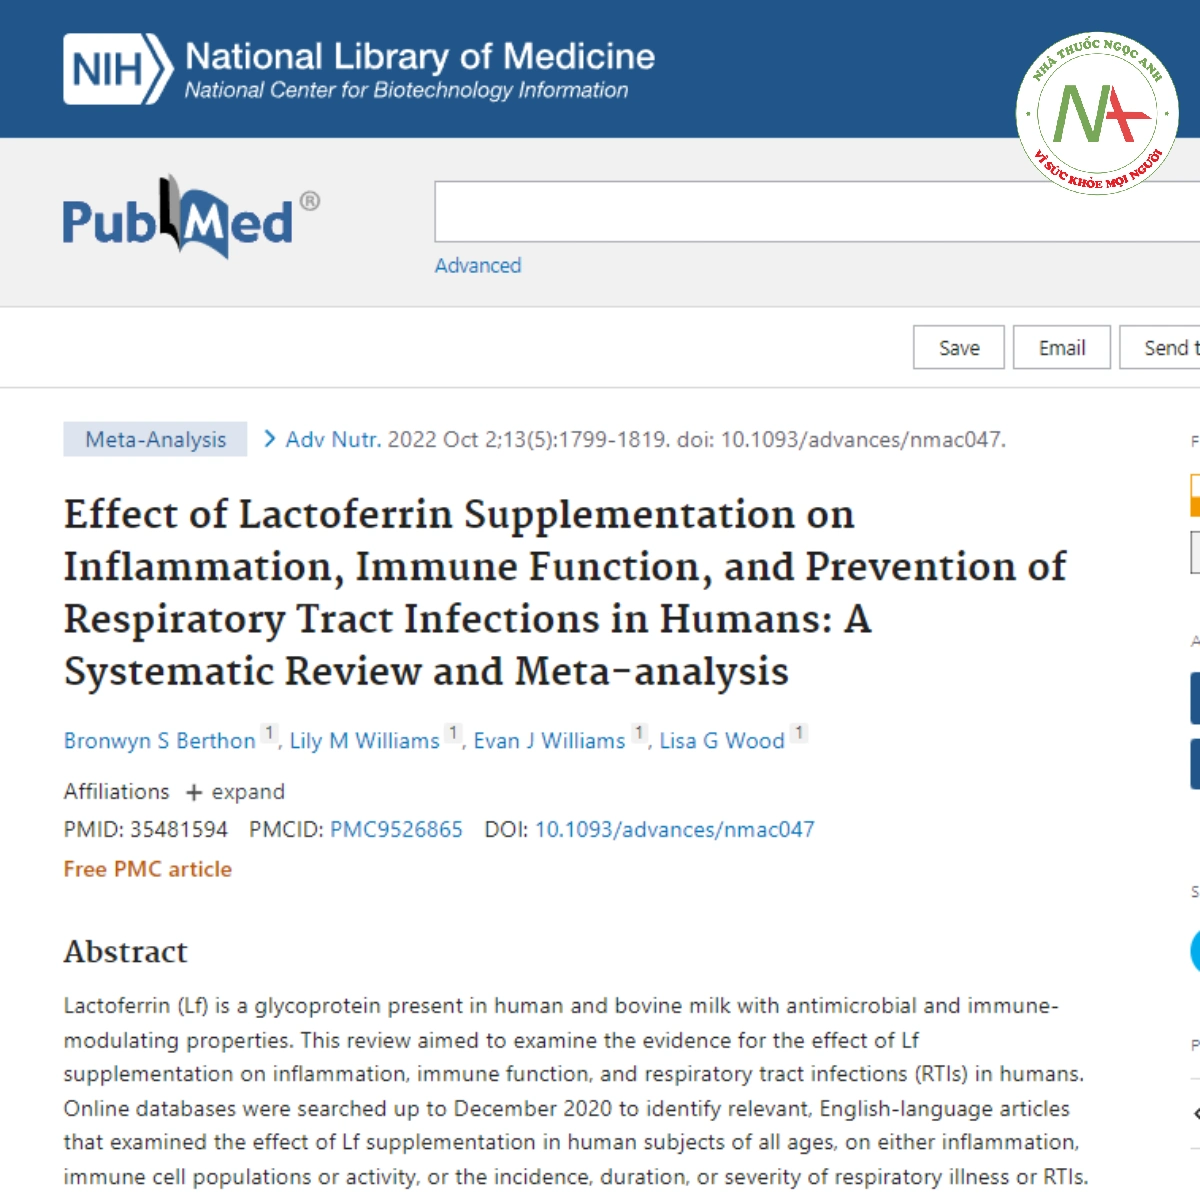 Effect of Lactoferrin Supplementation on Inflammation, Immune Function, and Prevention of Respiratory Tract Infections in Humans: A Systematic Review and Meta-analysis